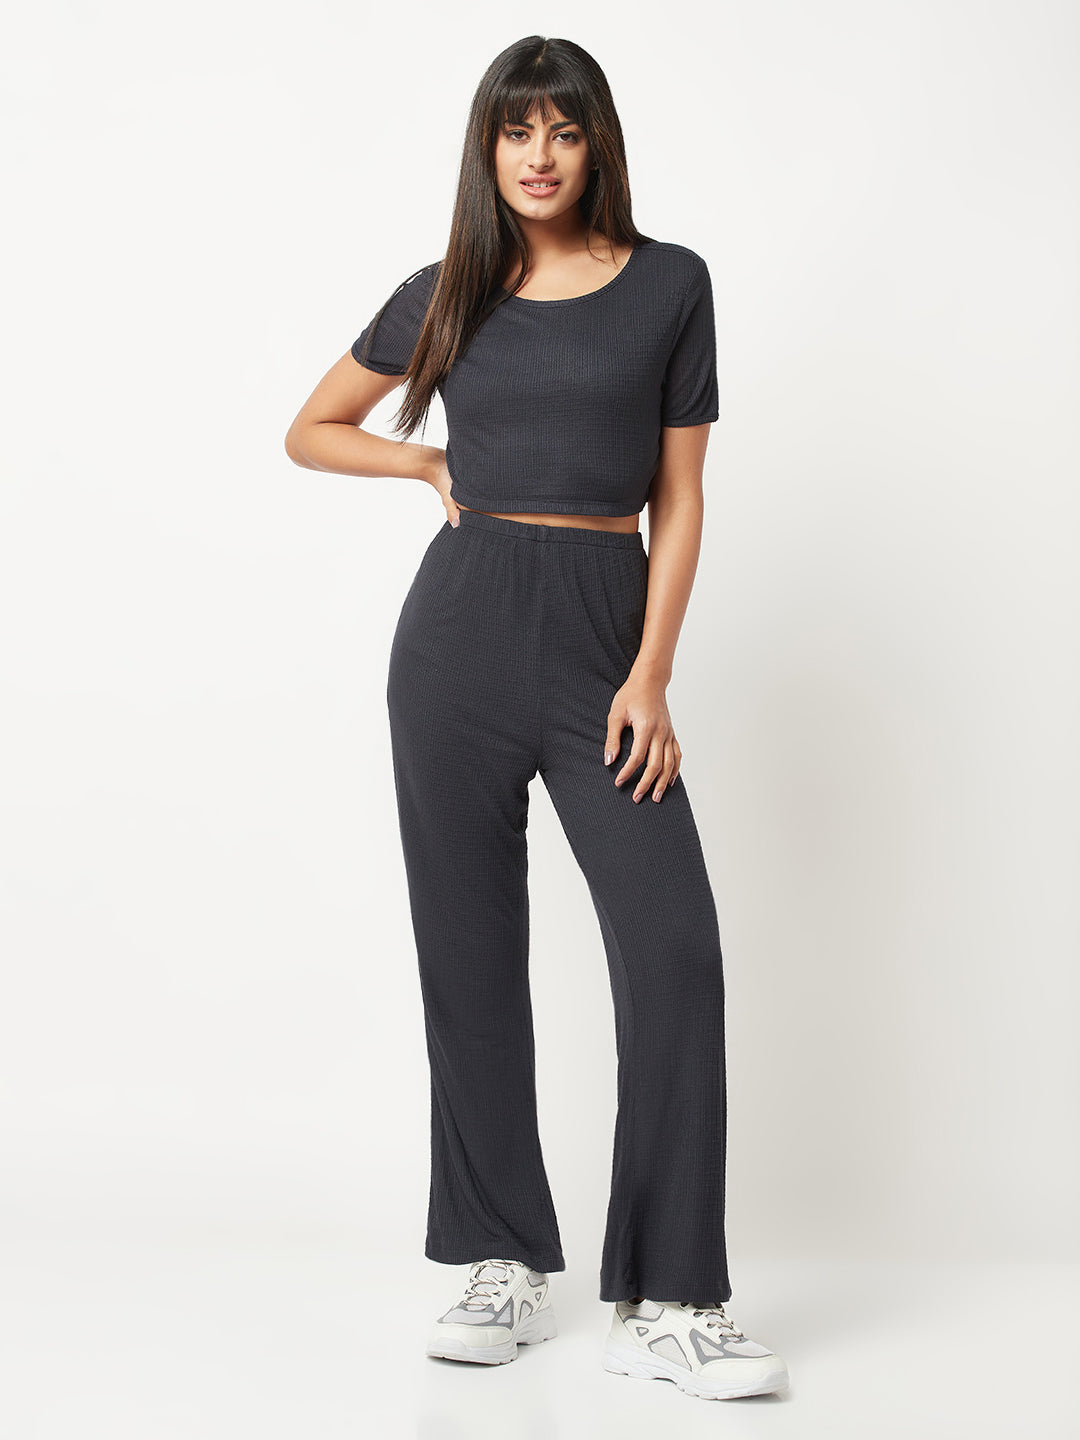 Charcoal Solid Co-ord Set